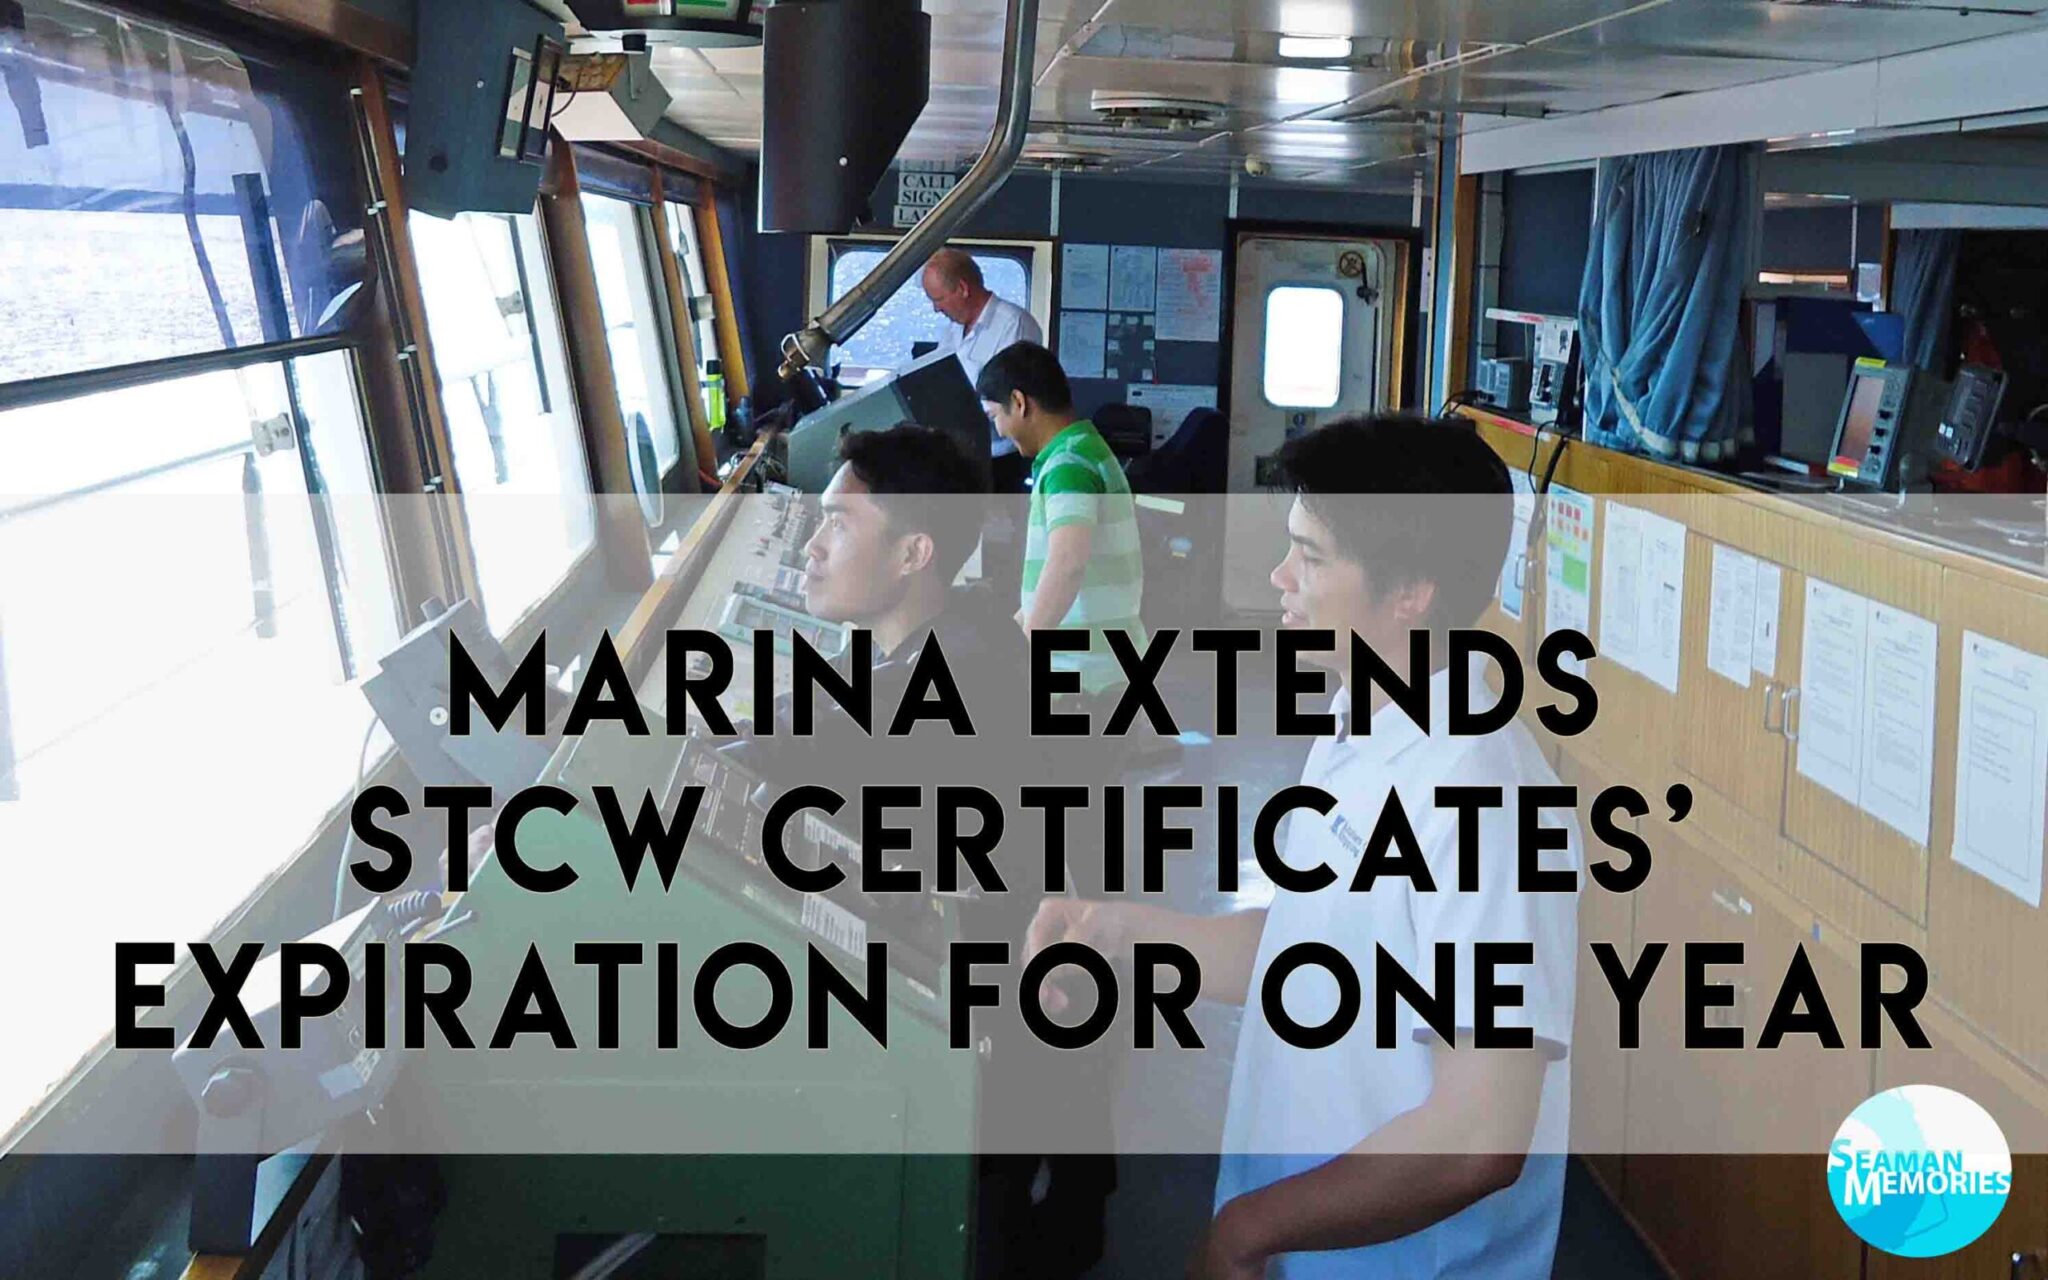 A helmsman on the ship's steering wheel and a foreground title about "MARINA Extends STCW Certificates' Expiration for One Year"